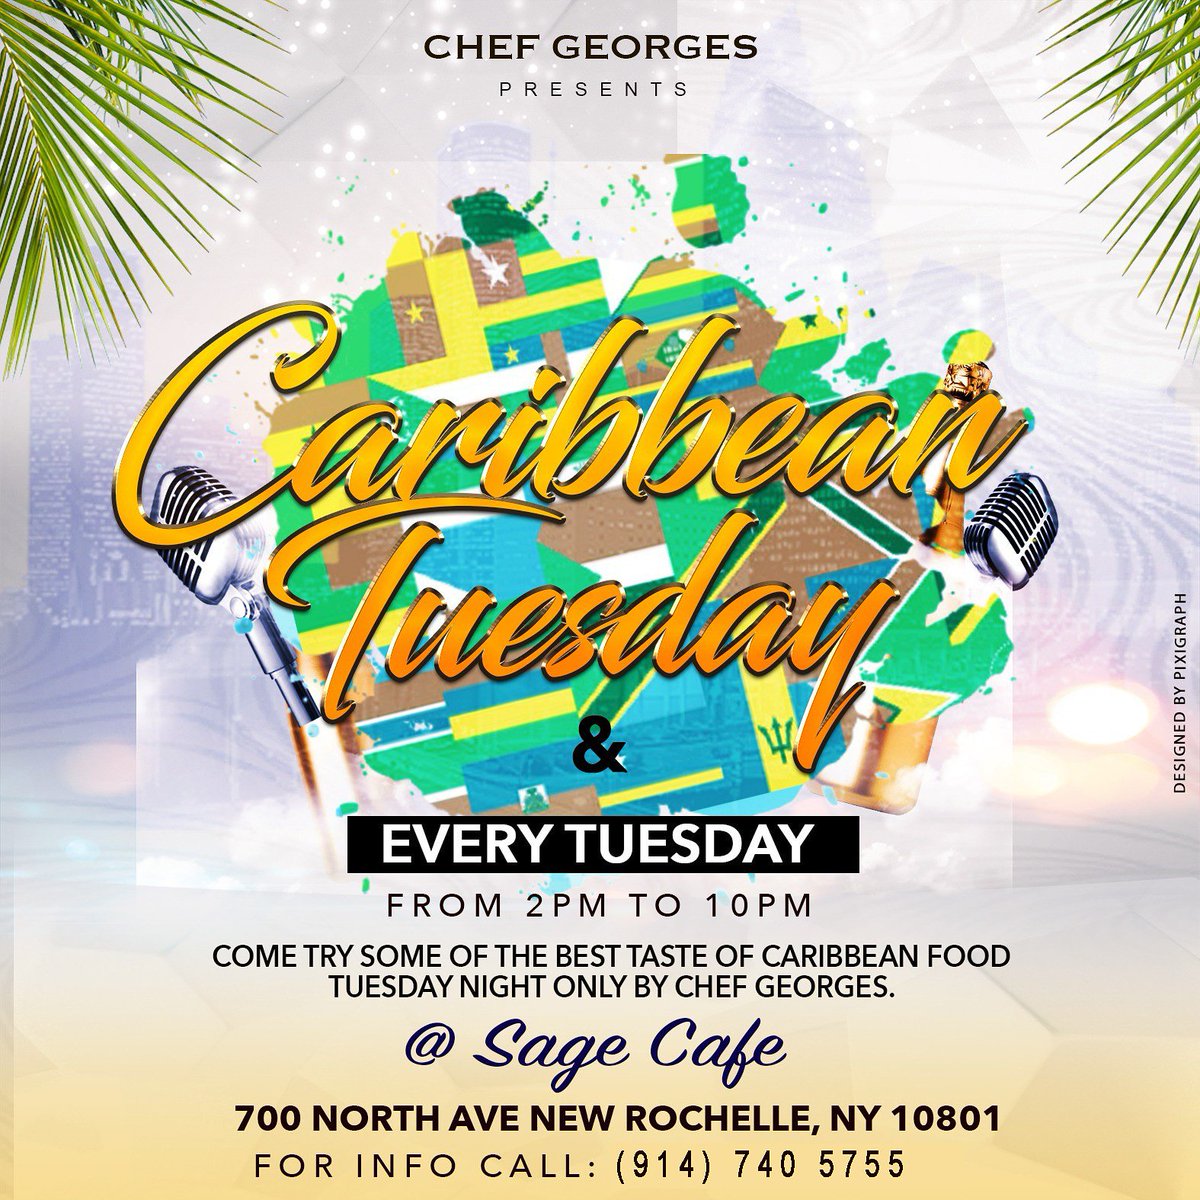 Join us for some Caribbean cuisine! Tuesdays are Caribbean Nights at Sage. 
Stop in an try one of Chef Georges delicious specialties!!
#caribbeancuisine #deliciousfood #westchestermore #westchester #westchesterfood #newrochelle #newrochelleeats #sagecafemarketmore #sage